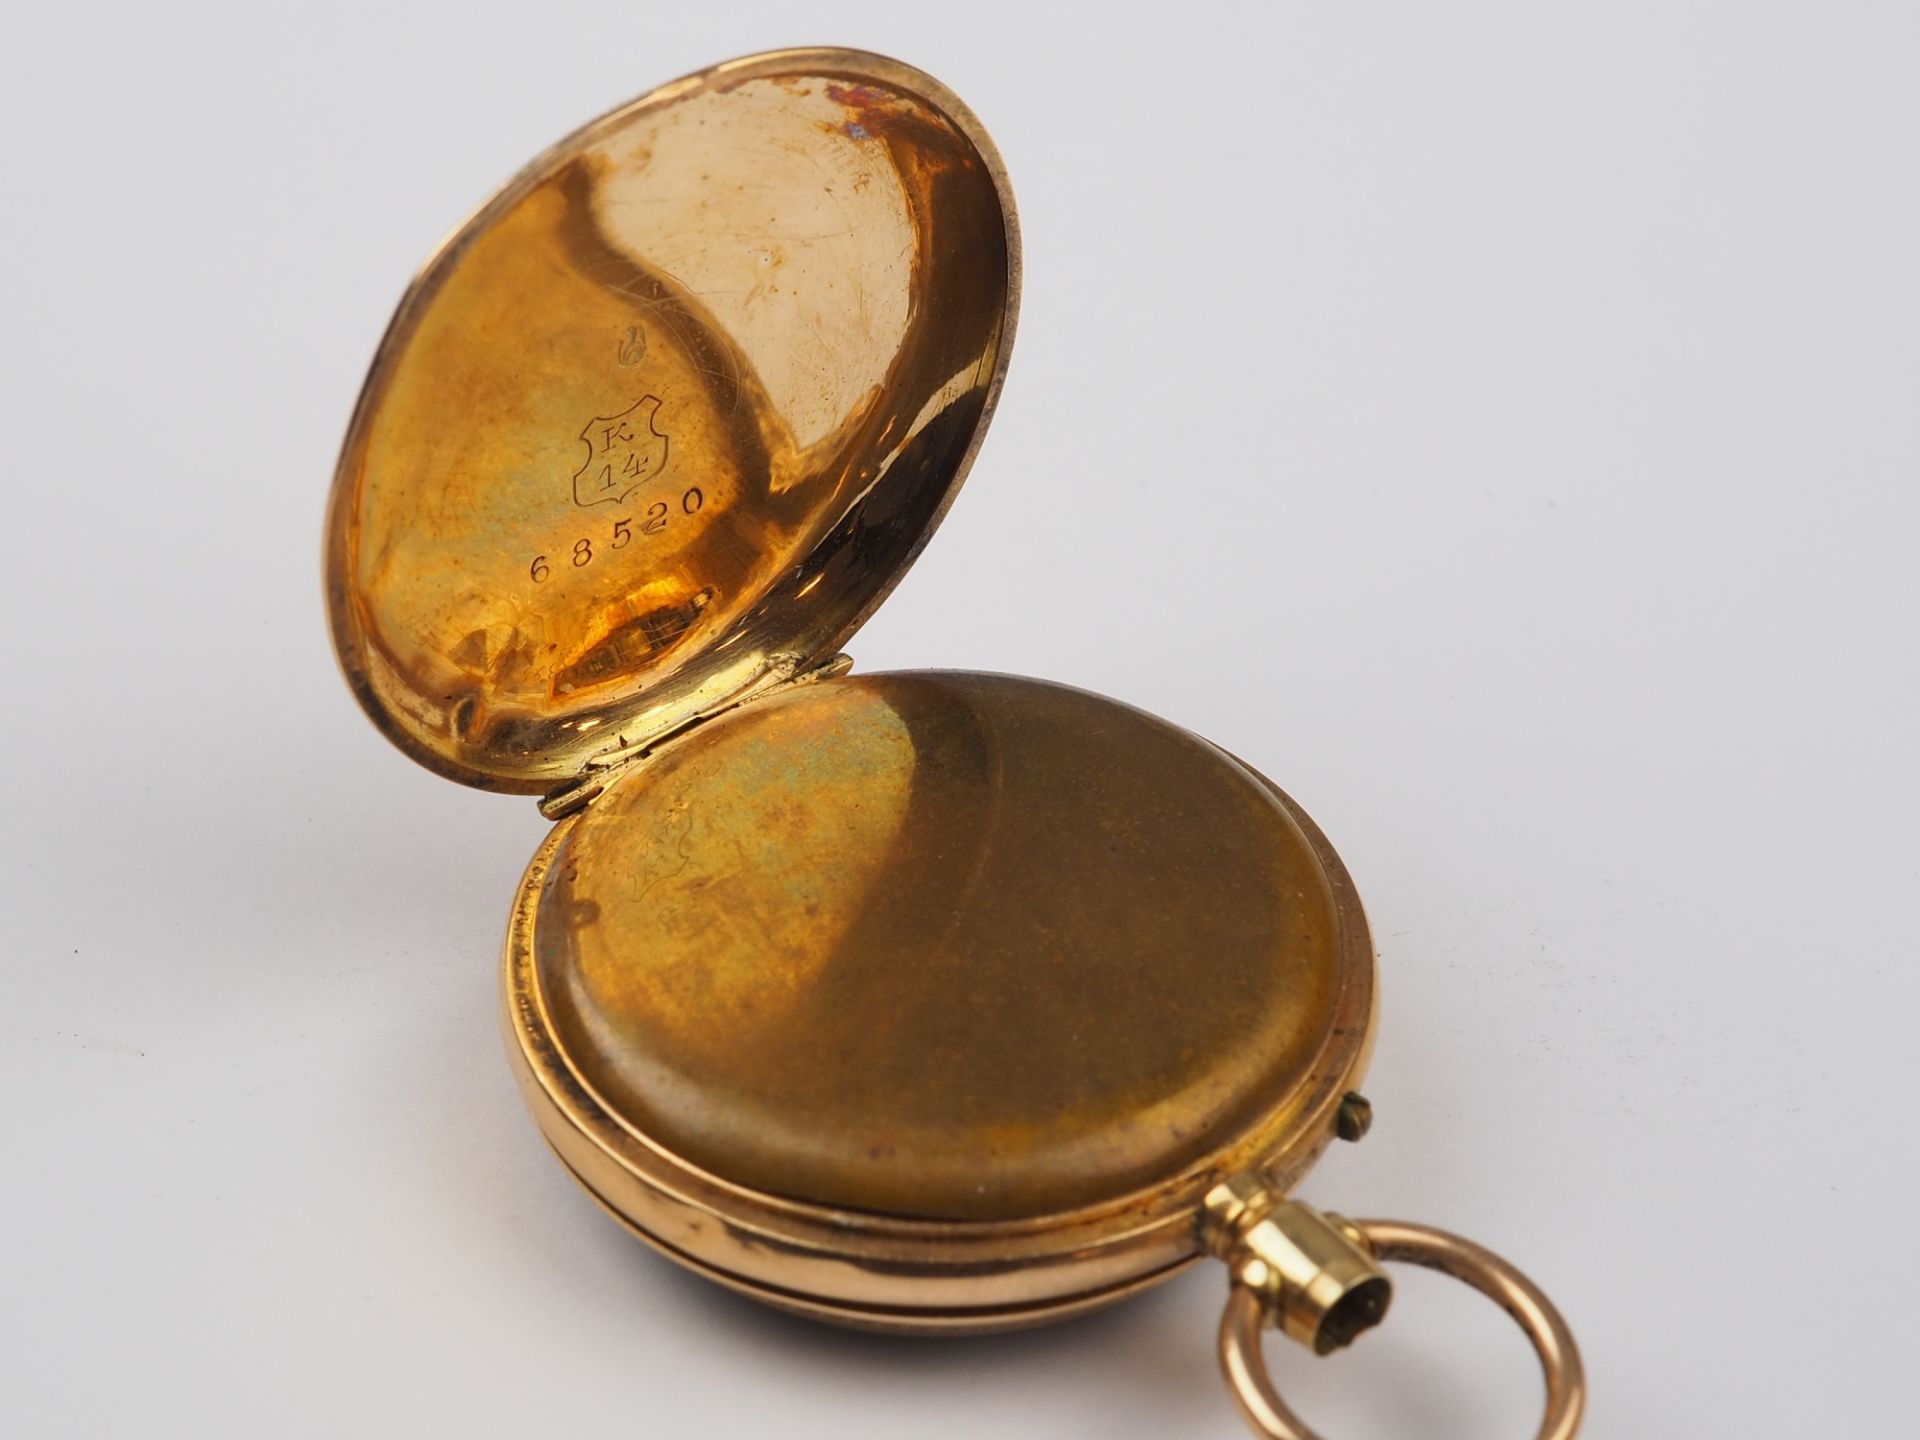 Lady's pocket watch in gold case around 1900 - Image 4 of 4